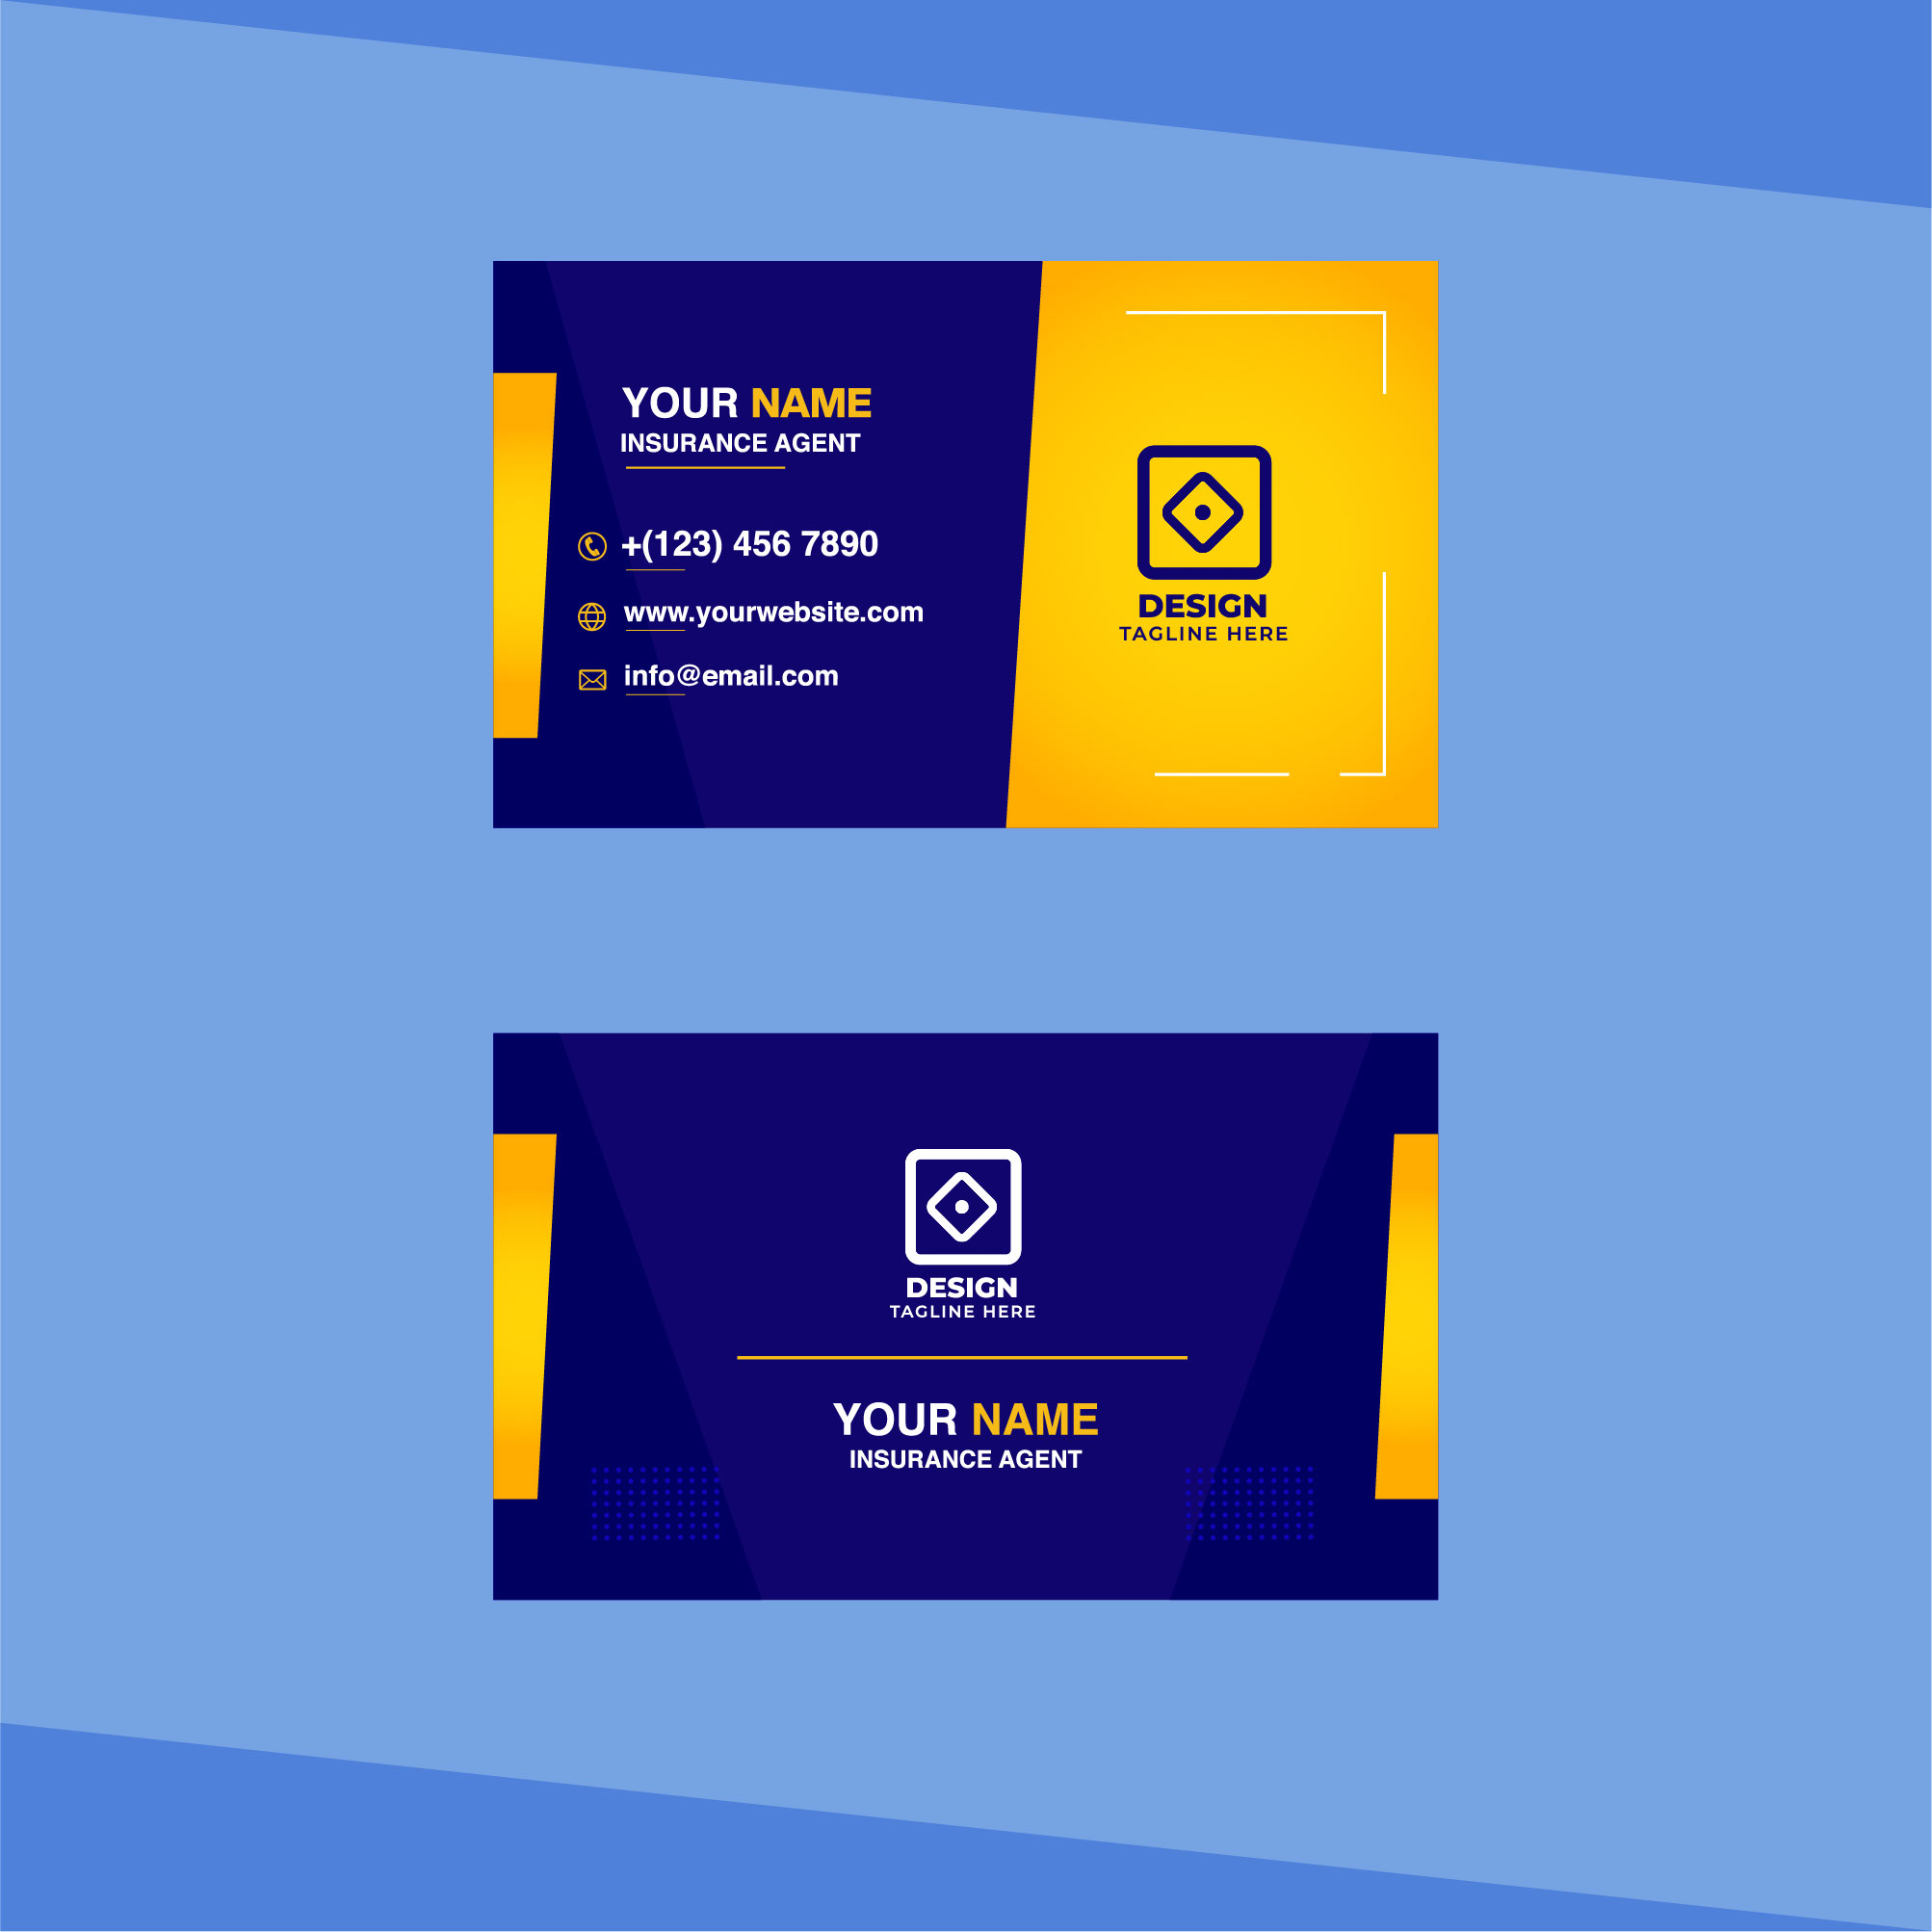 clean and modern style insurance broker business card 1 801